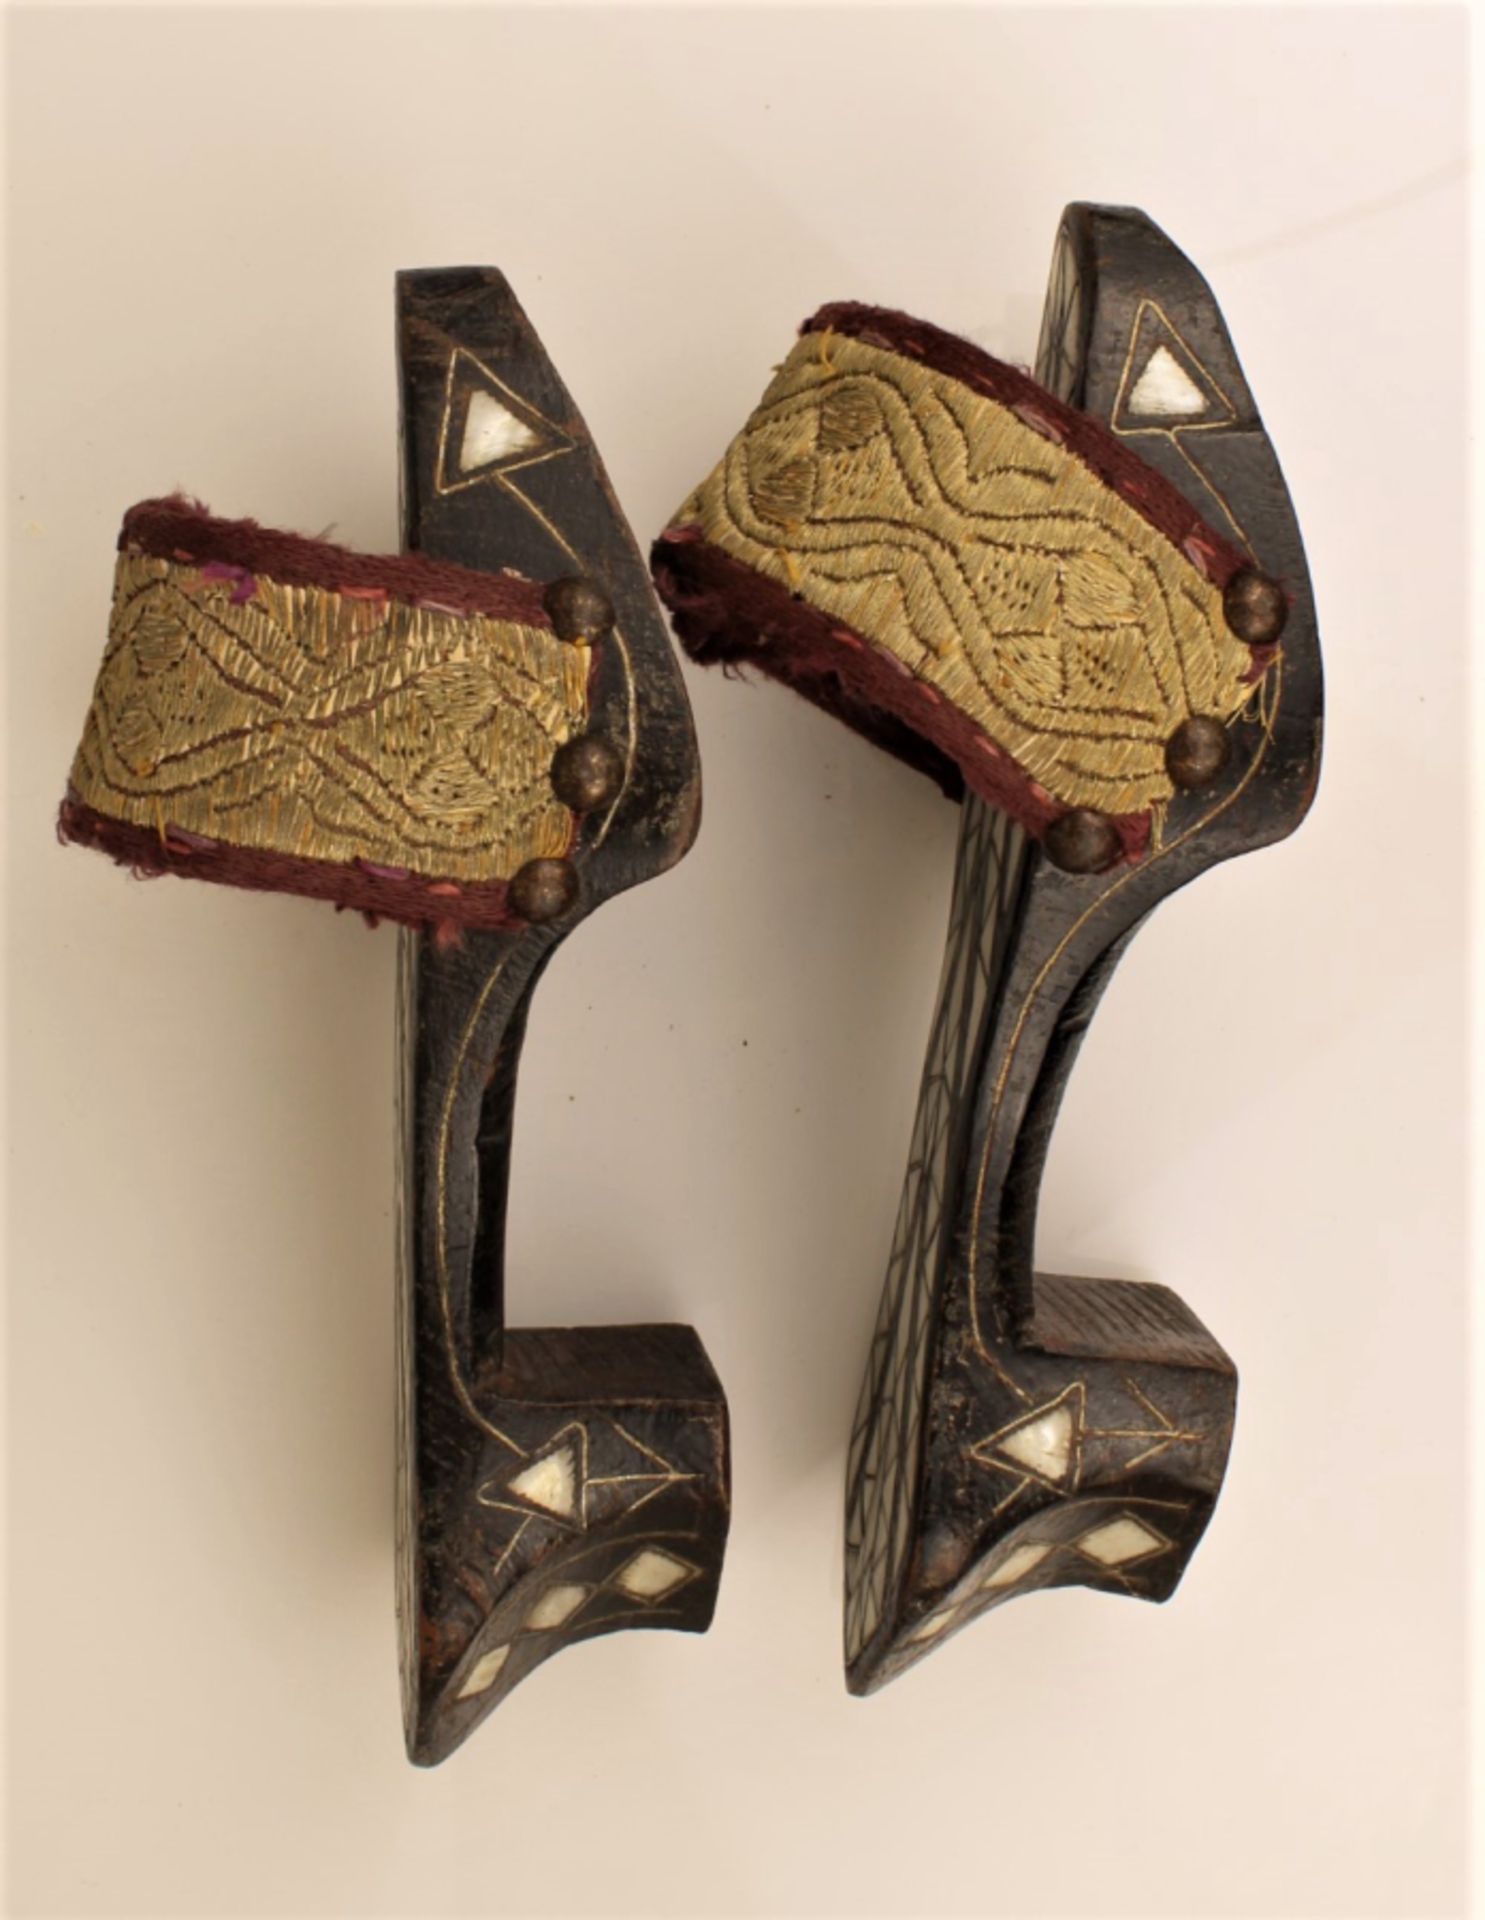 19th century Ottoman Ladies shoes - Image 3 of 3